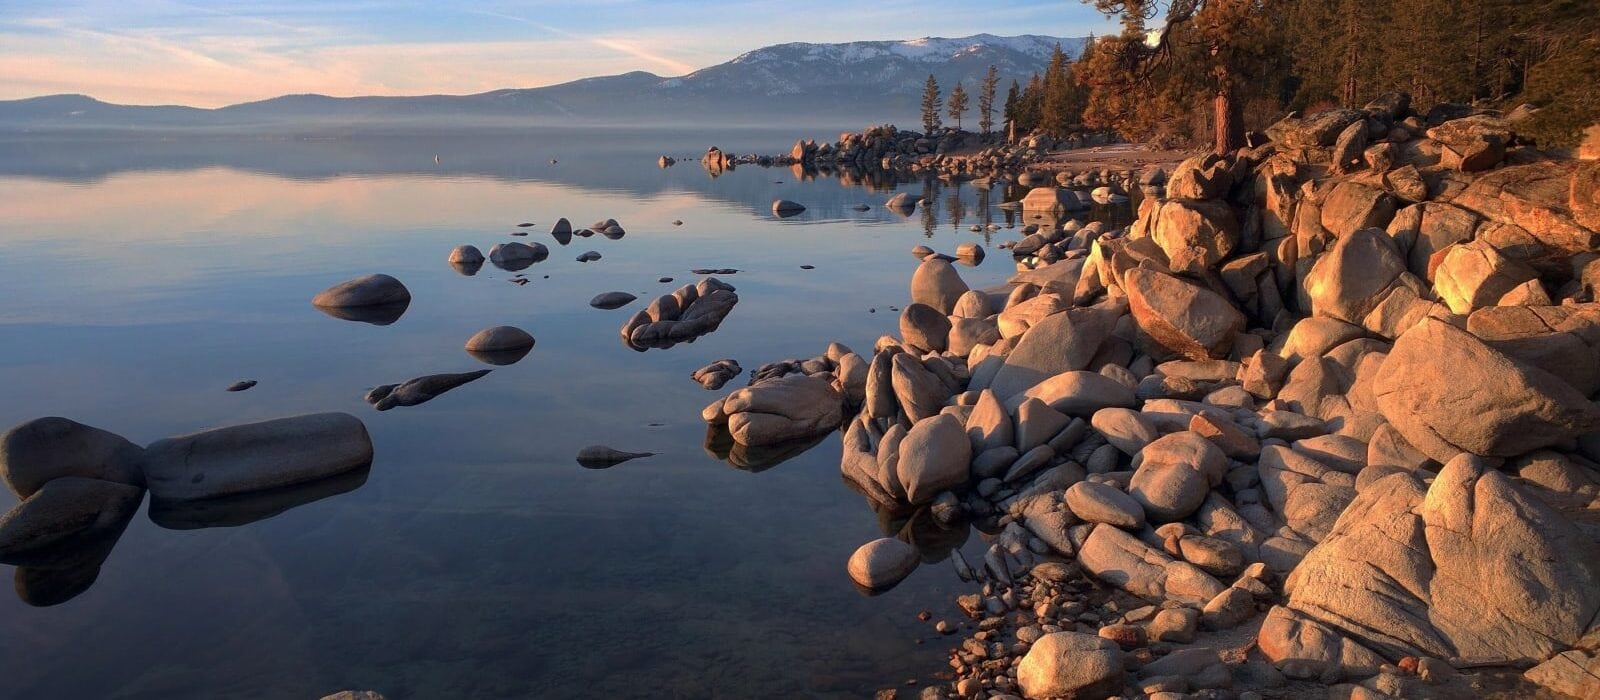 15 Best Hikes in Lake Tahoe (According to a Backpacking Guide)